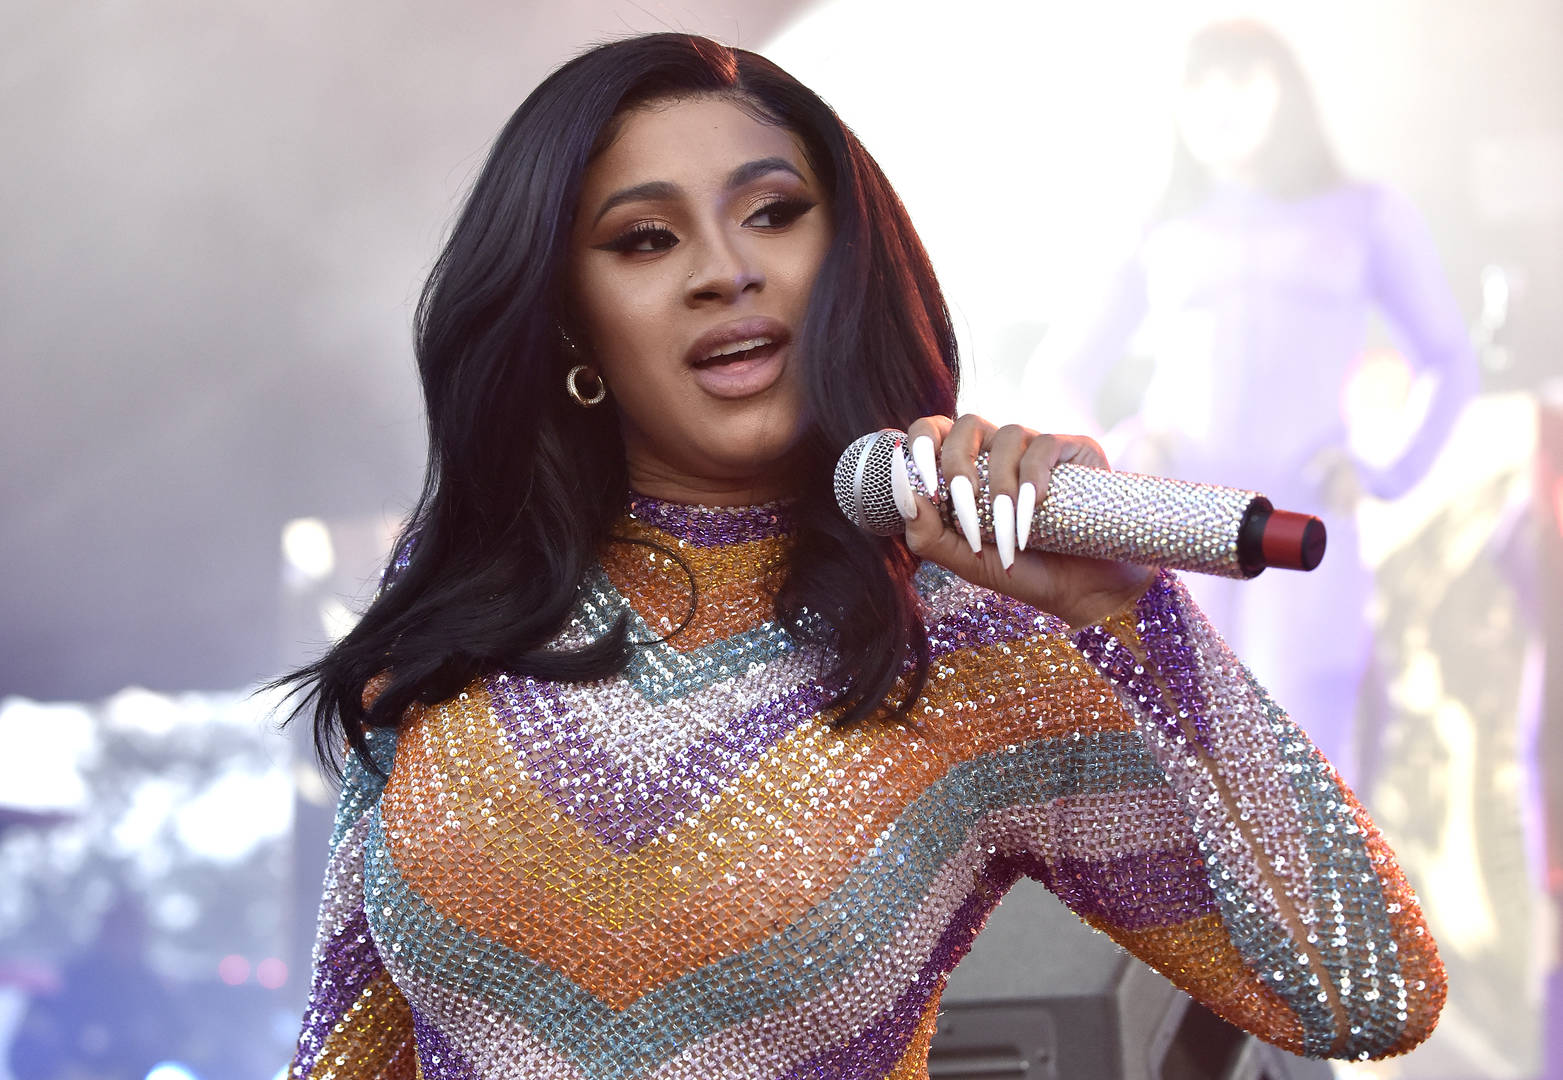 Cardi B Opens BET Awards With "Clout" & "Press" Medley Alongside Offset 16